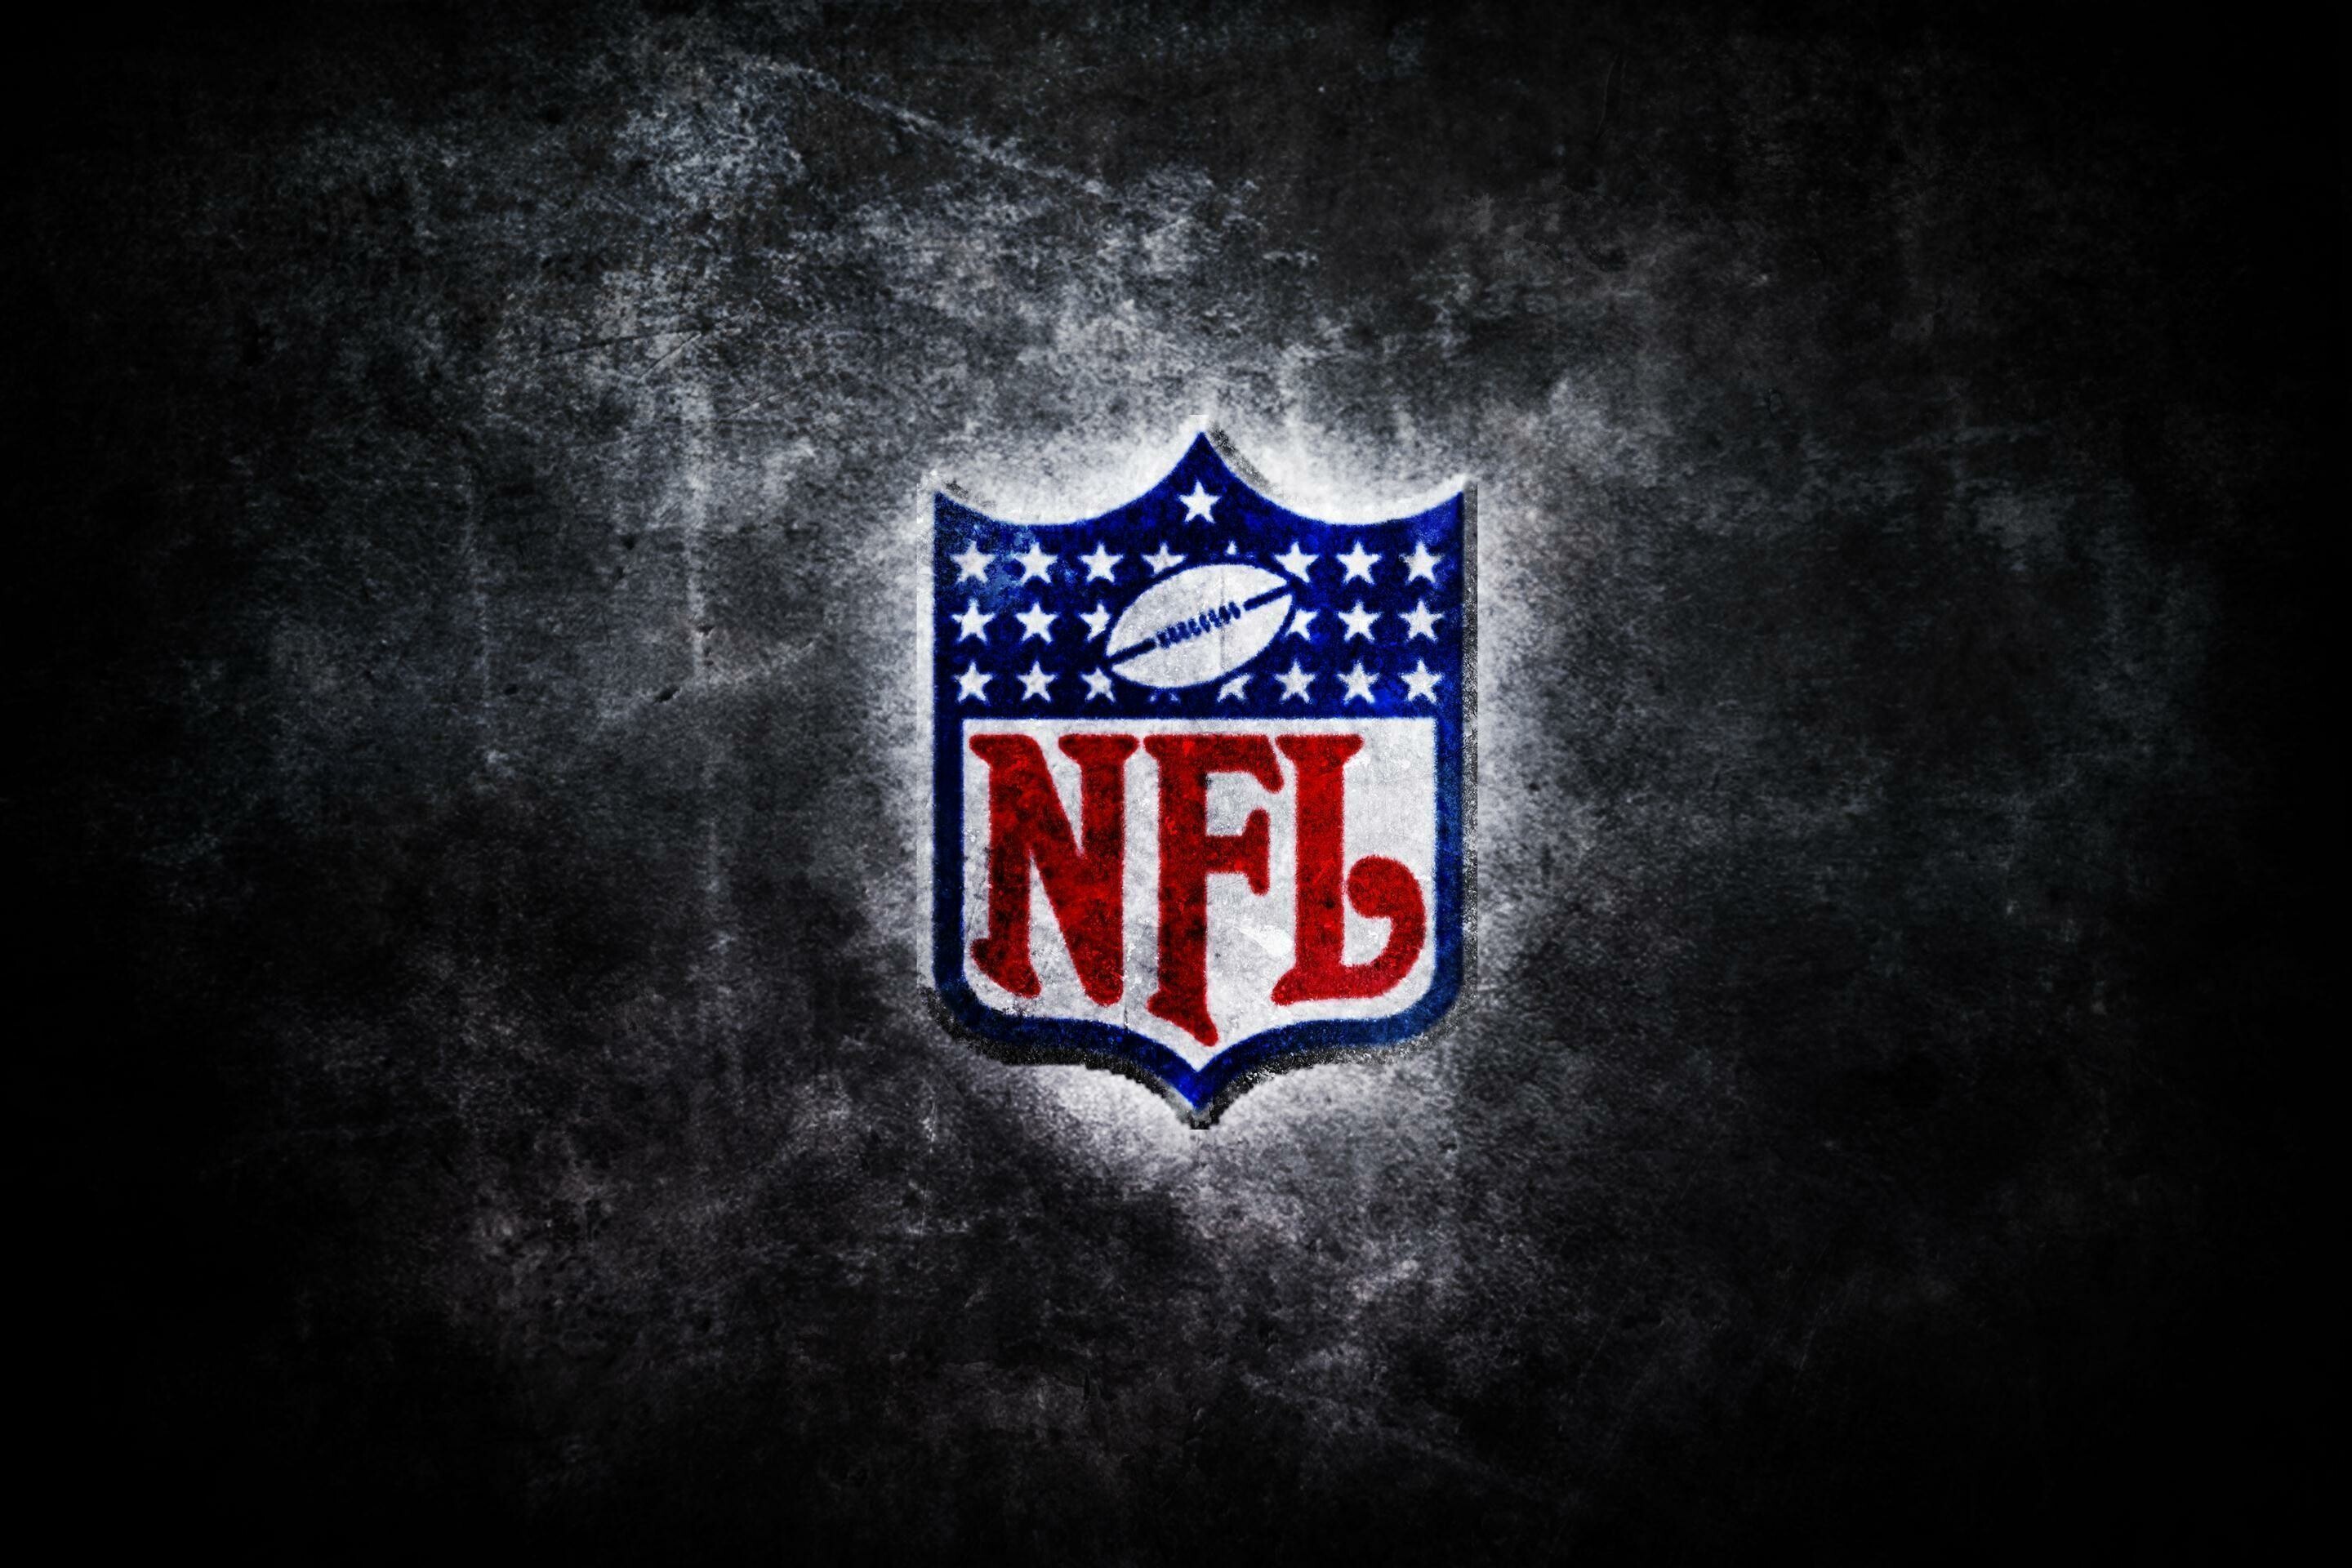 60+ NFL Wallpapers: HD, 4K, 5K for PC